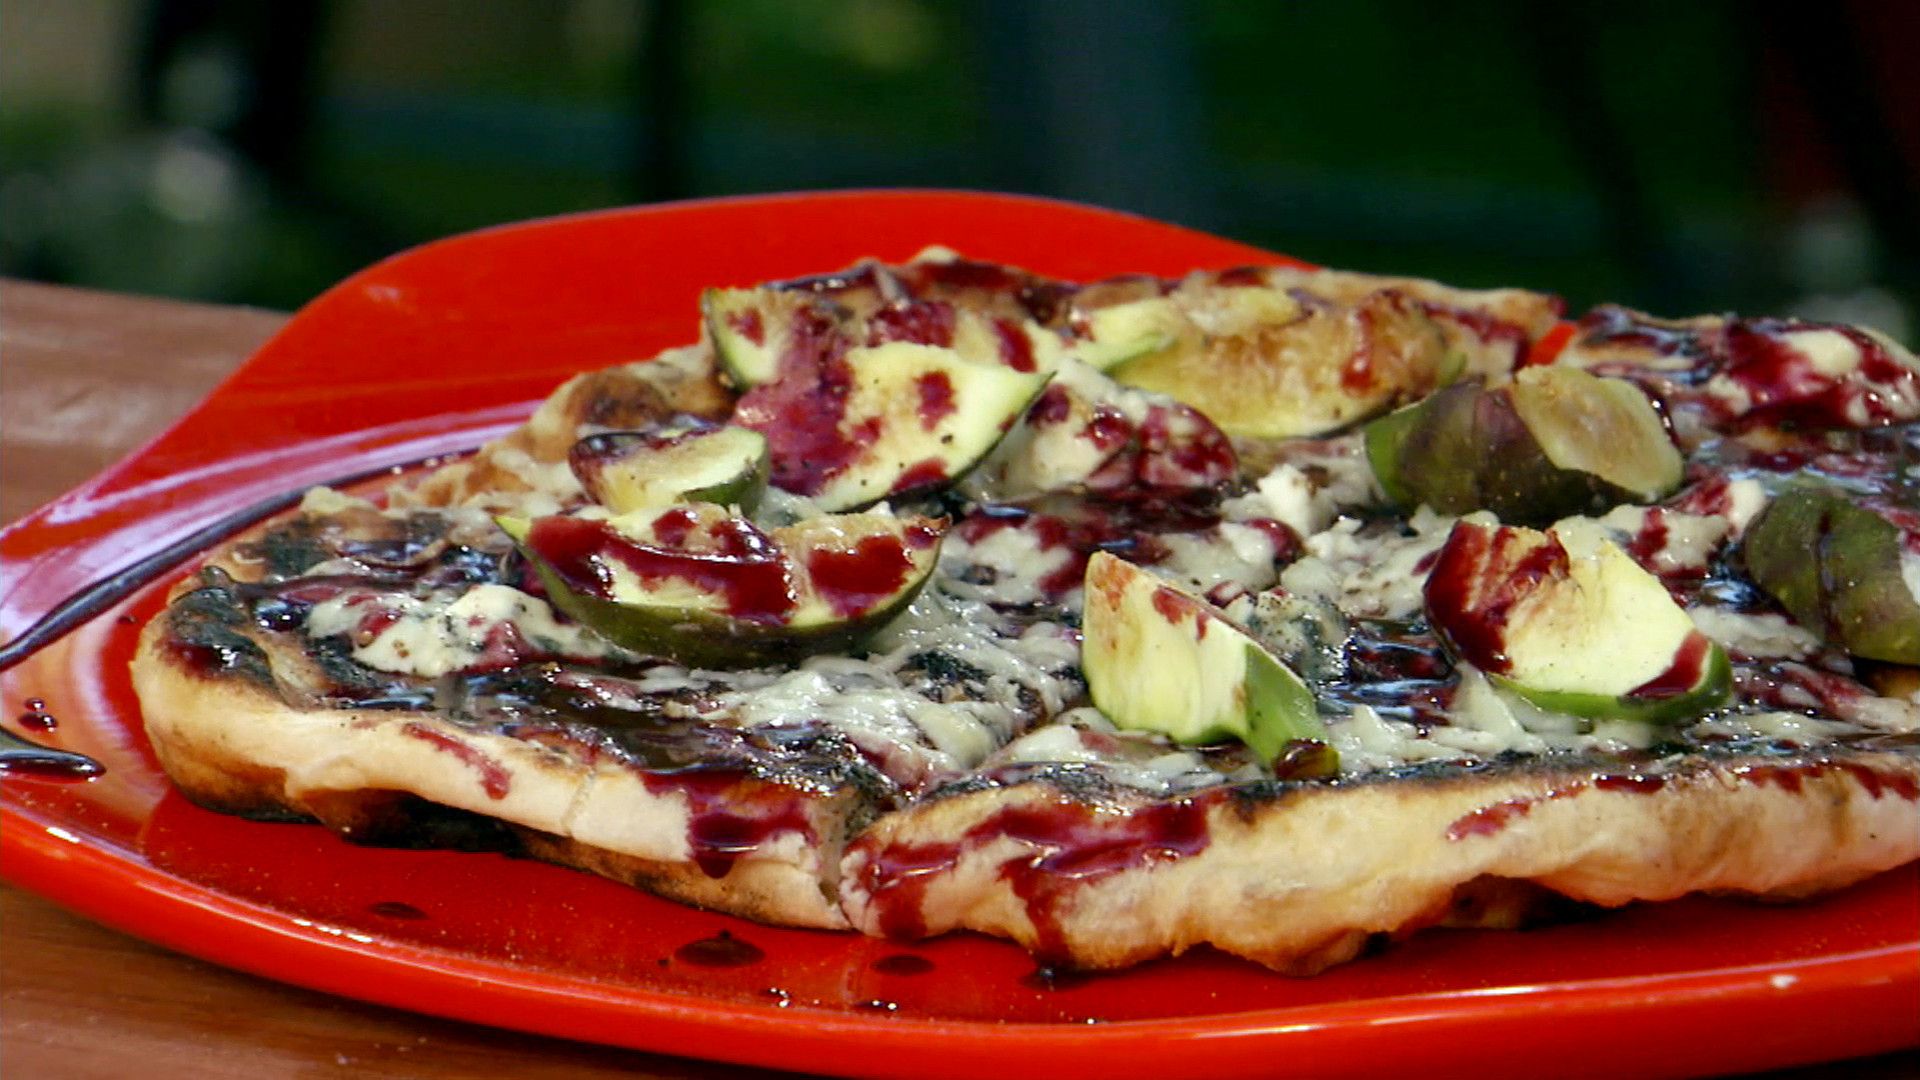 Pizza Dough Recipe Bobby Flay
 grilled pizza dough recipe bobby flay